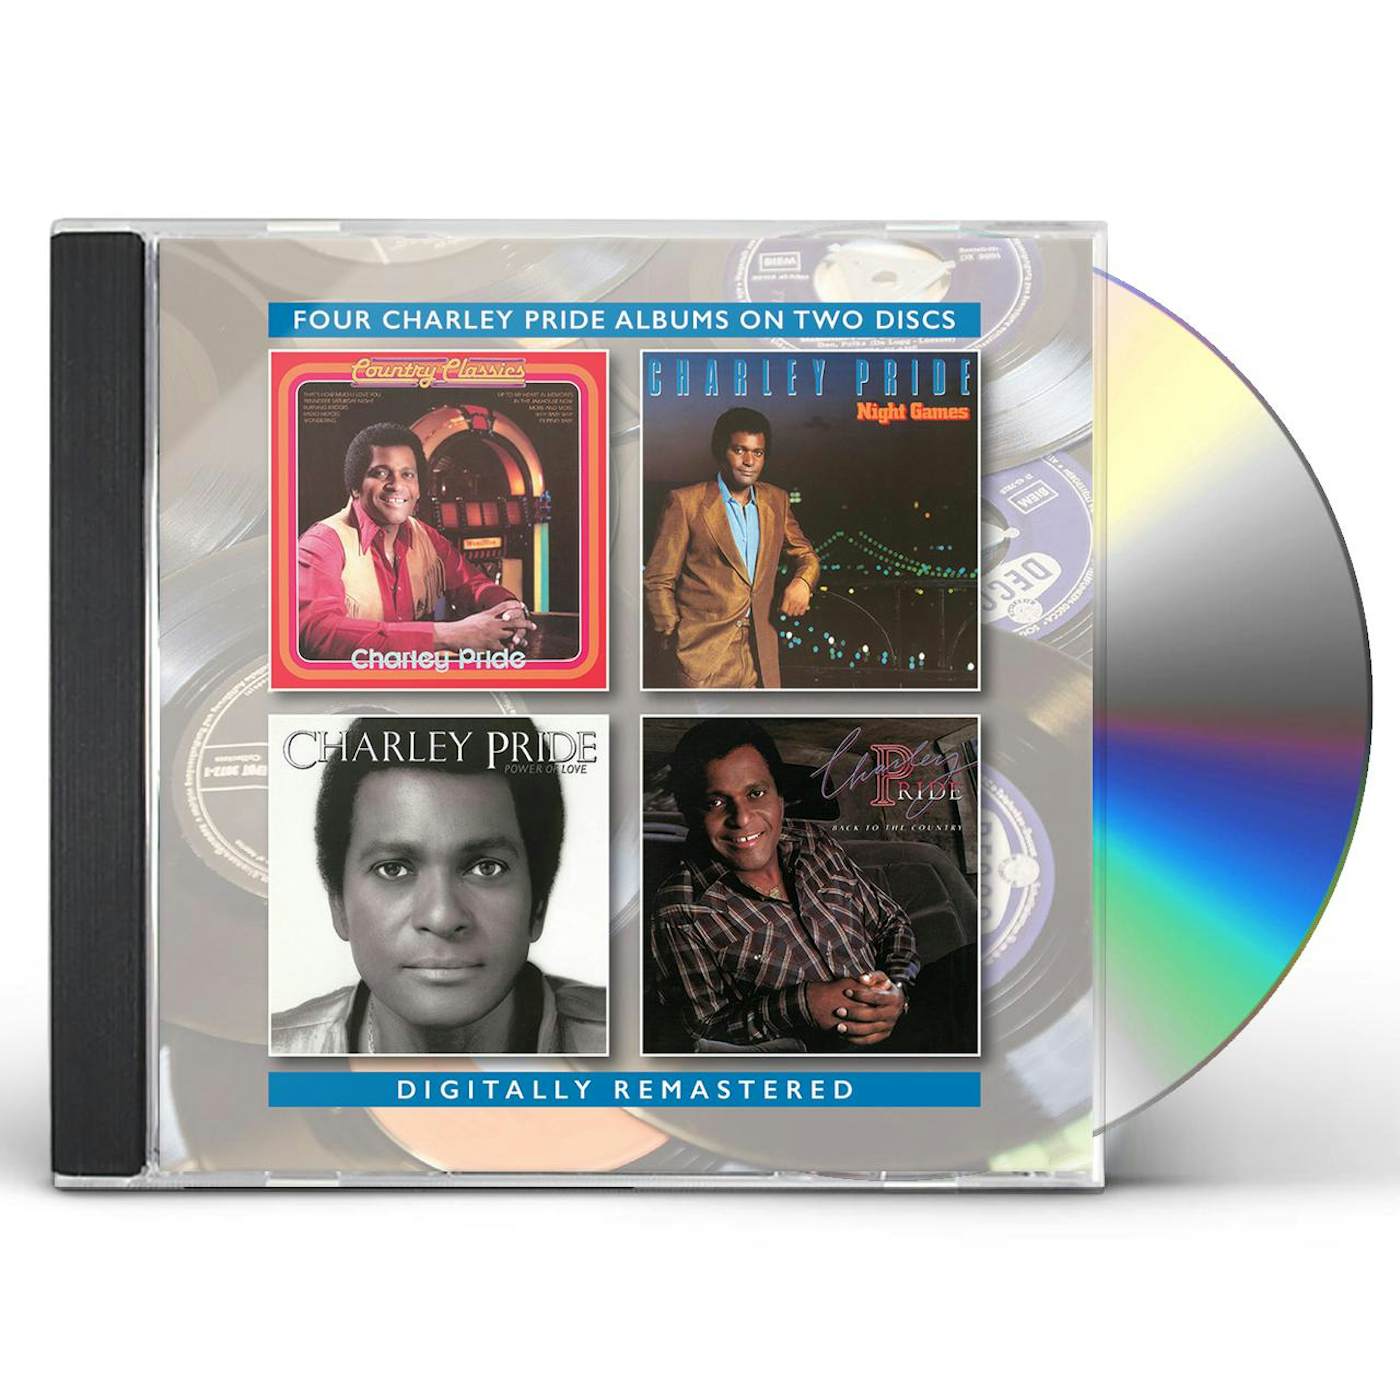 Charley Pride COUNTRY CLASSICS / NIGHT GAMES / POWER OF LOVE / BACK TO THE COUNTRY (REMASTERED) CD